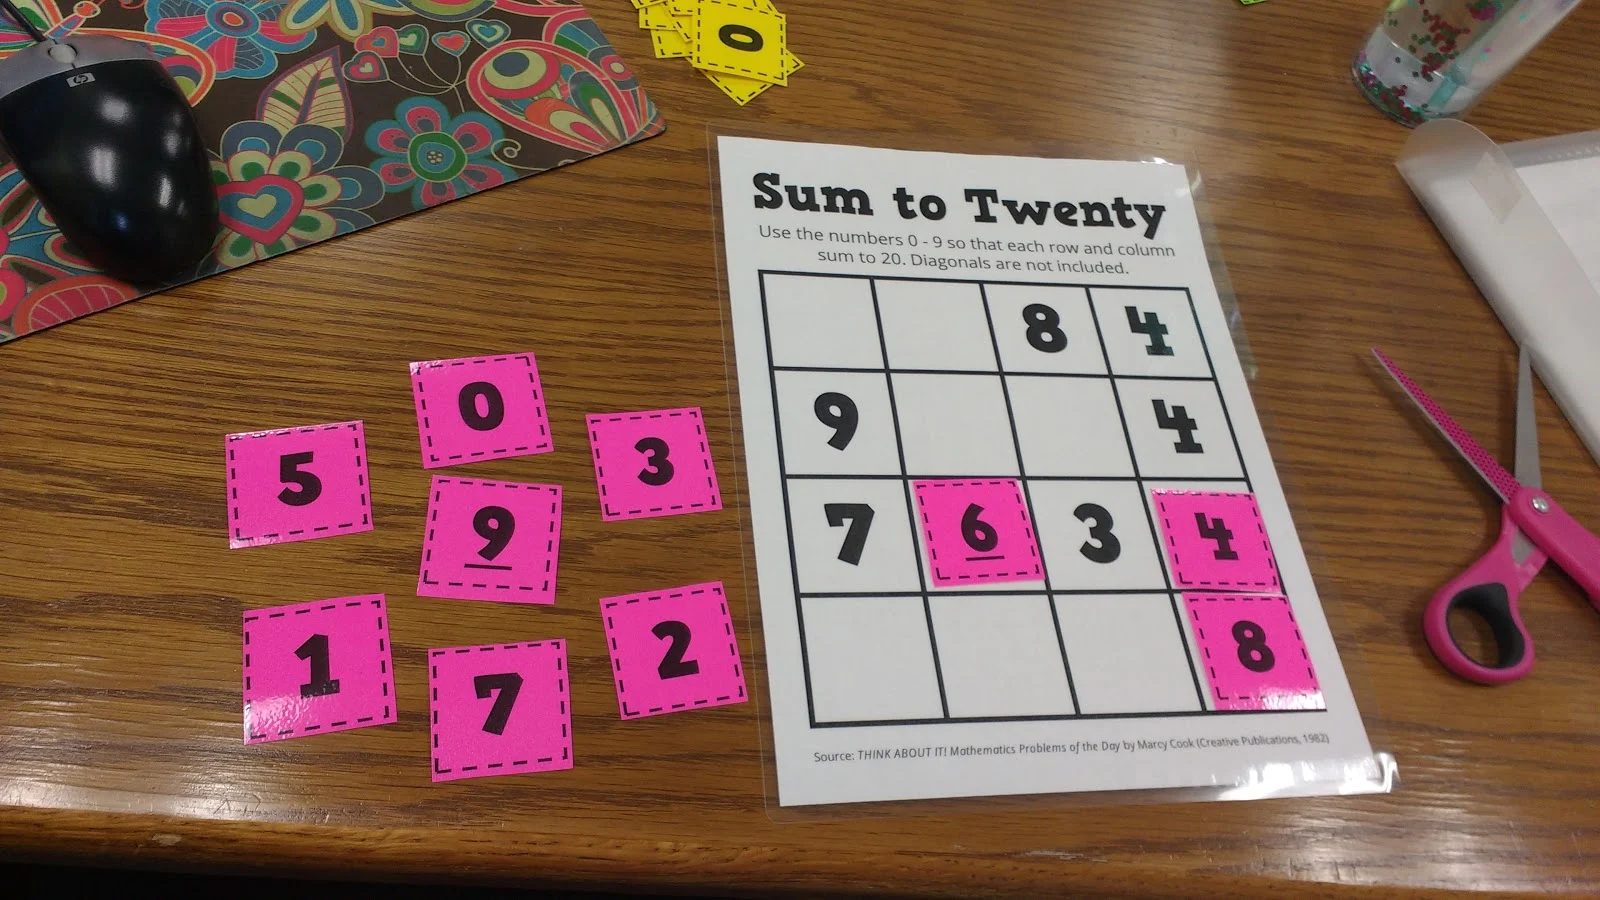 Sum to Twenty Puzzle by Marcy Cook